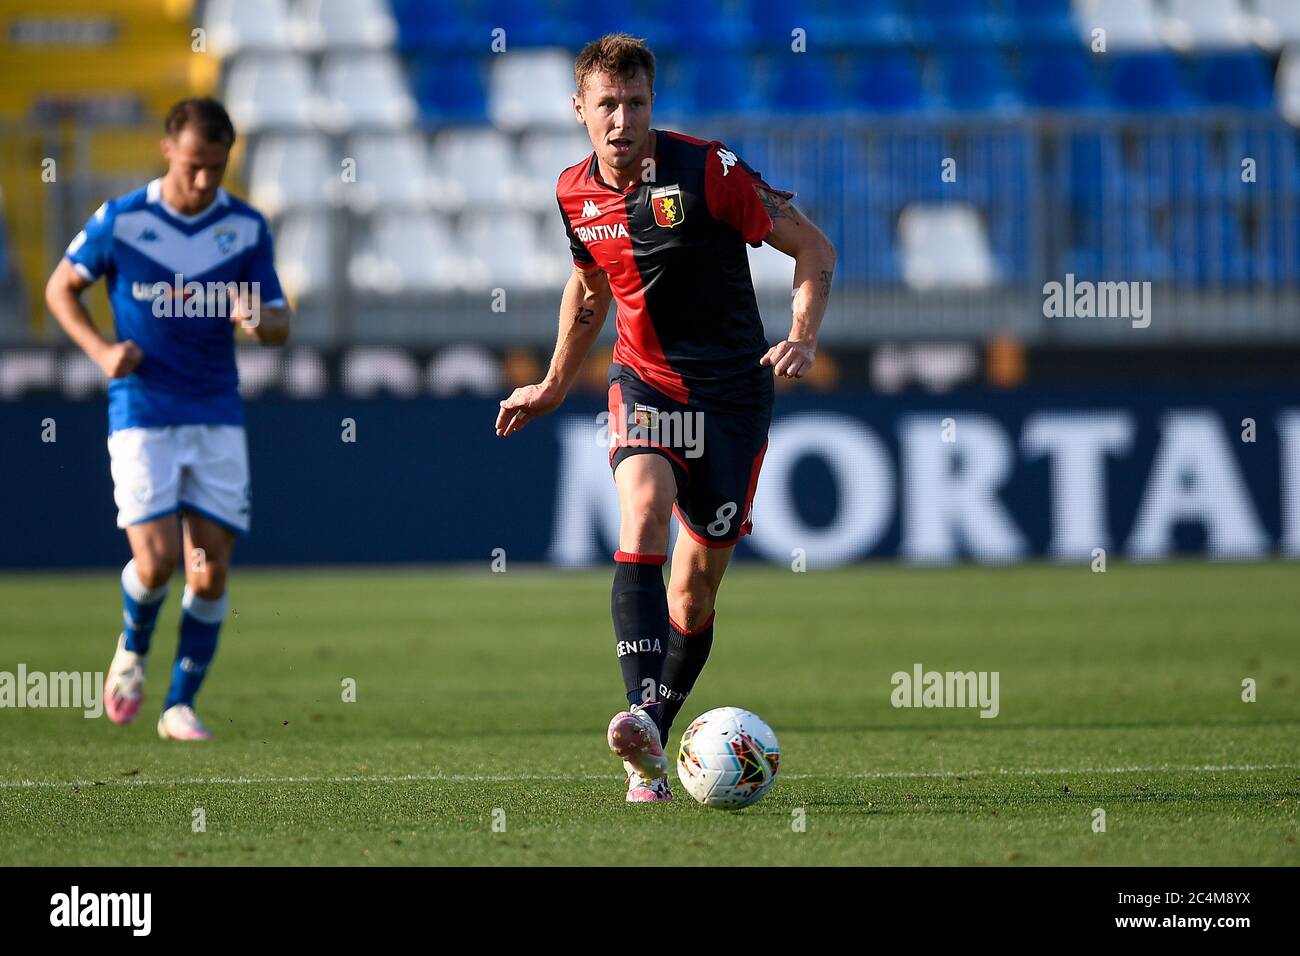 Brescia, Italy - 27 June, 2020: Lukas Lerager of Genoa CFC in action during the Serie A football match between Brescia Calcio and Genoa CFC. The match ended in a 2-2 tie. Credit: Nicolò Campo/Alamy Live News Stock Photo